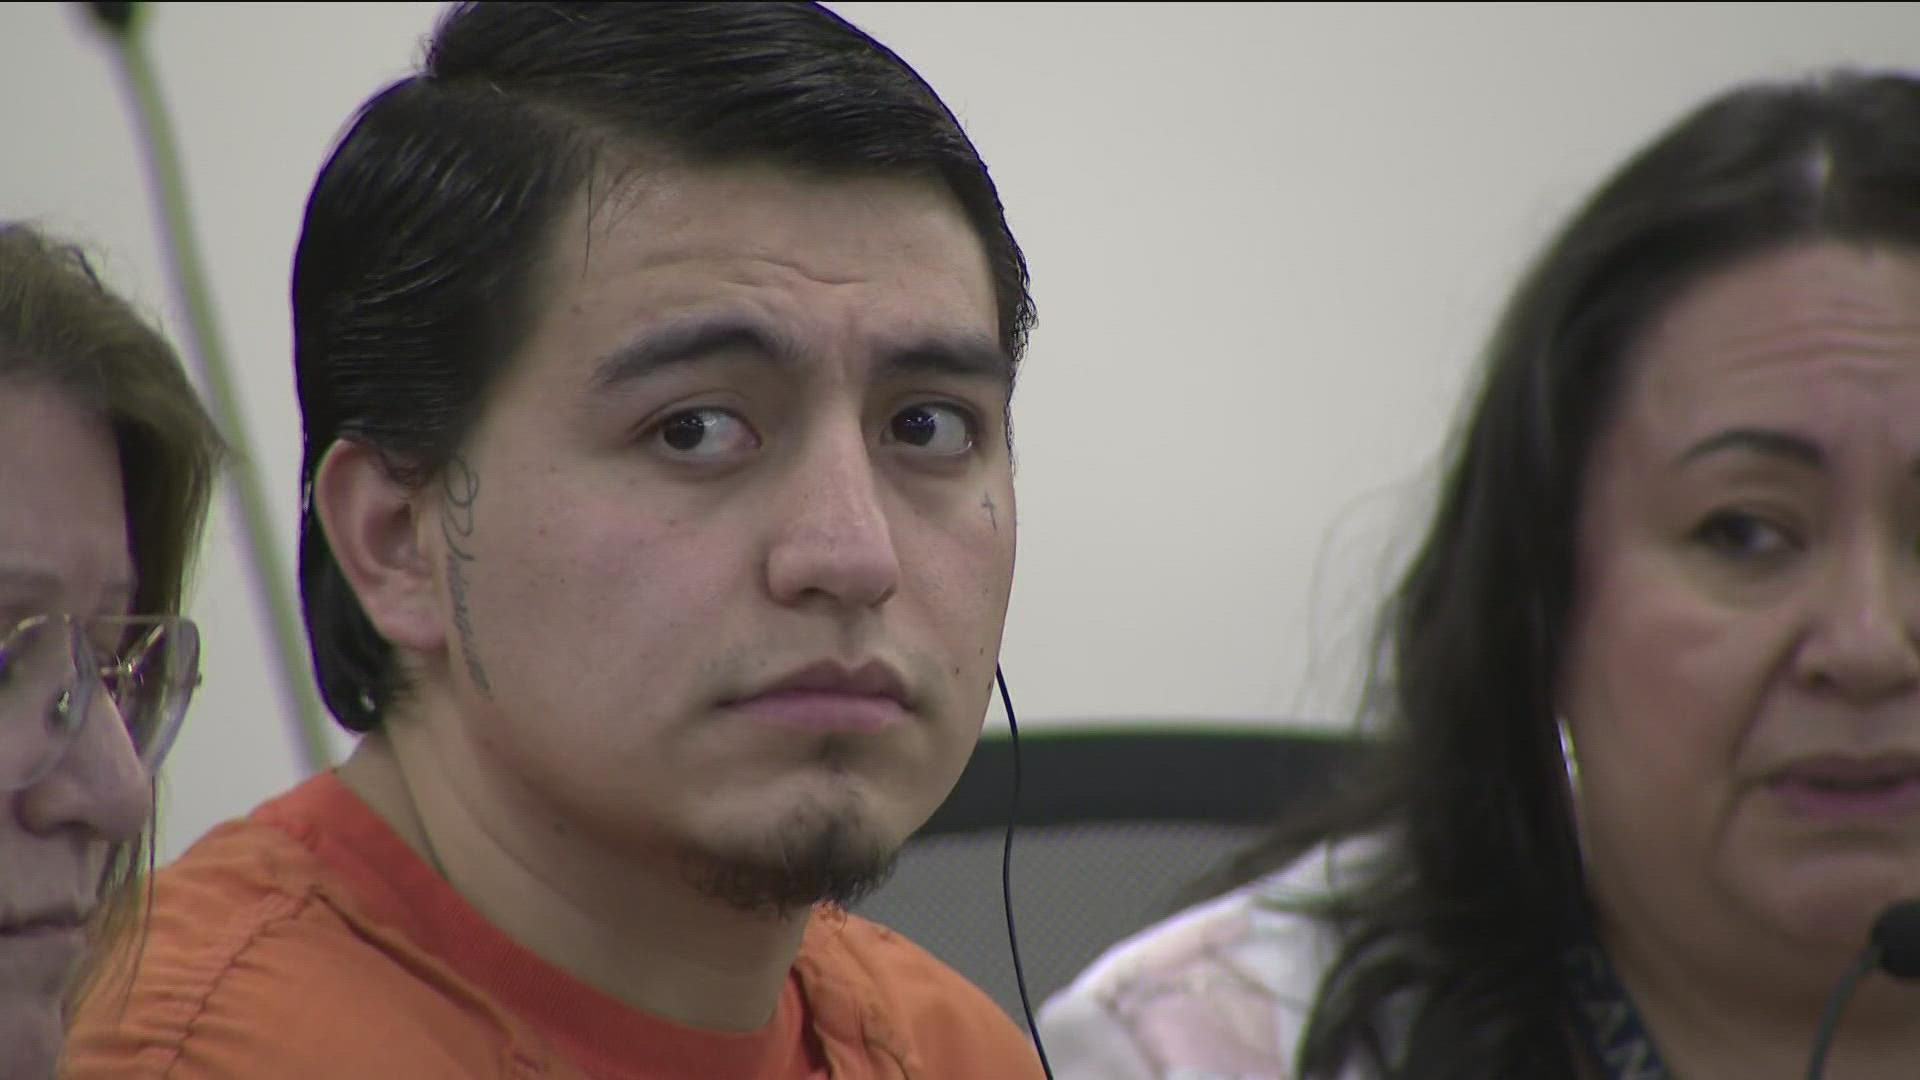 Sergio Jimenez was charged with second-degree murder in the death of Luis Garcia in November 2021. A judge sentenced Jimenez to 30 years behind bars Wednesday.